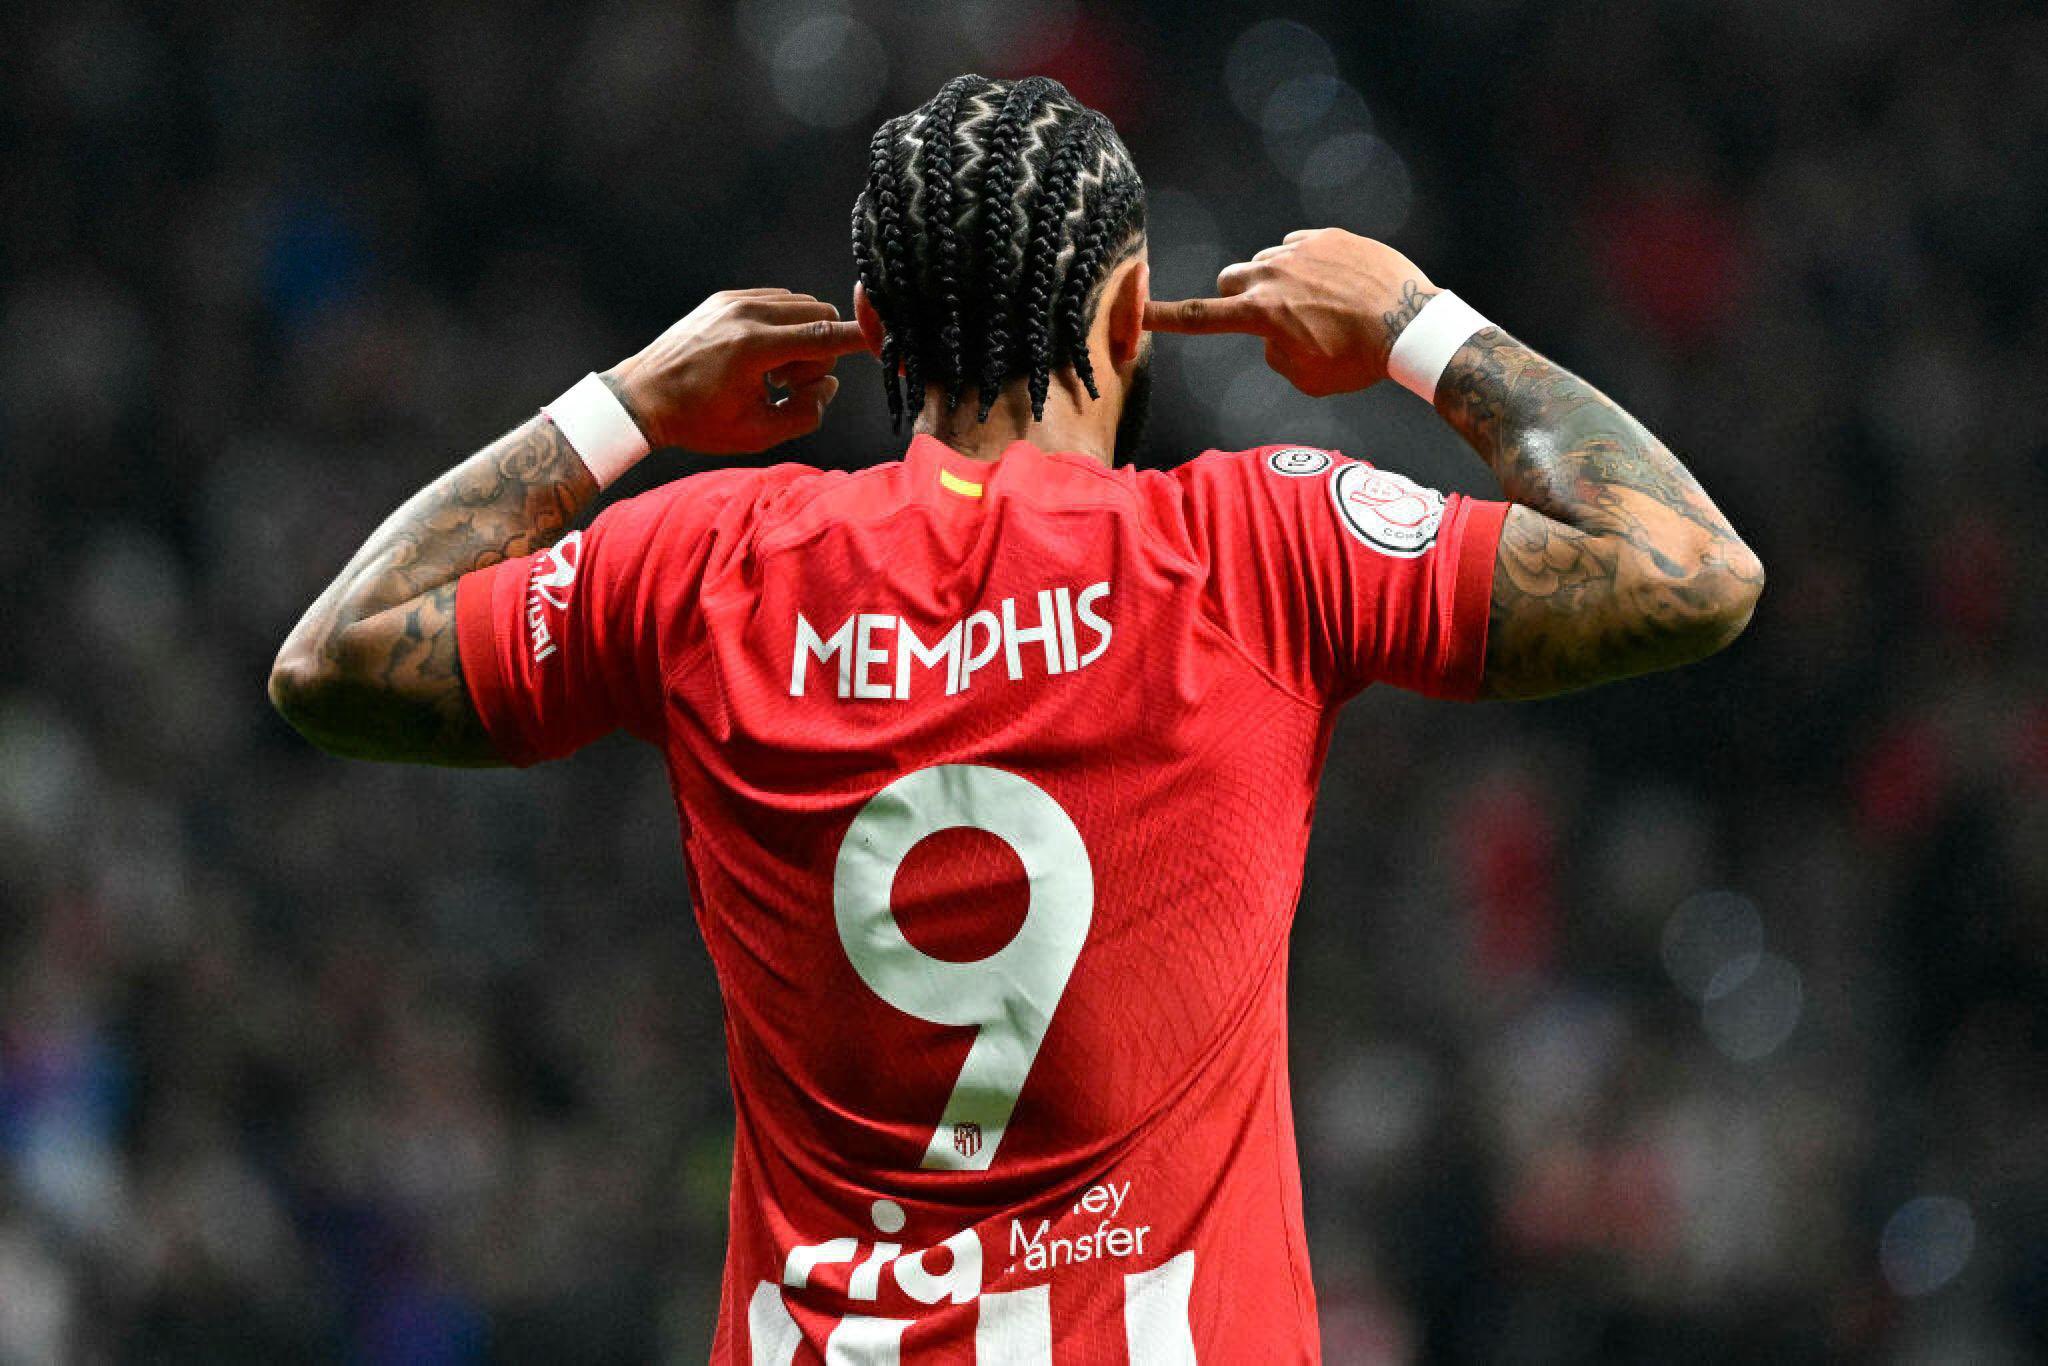 Atletico Madrid welcome Memphis Depay back from month-long injury ahead of season run-in